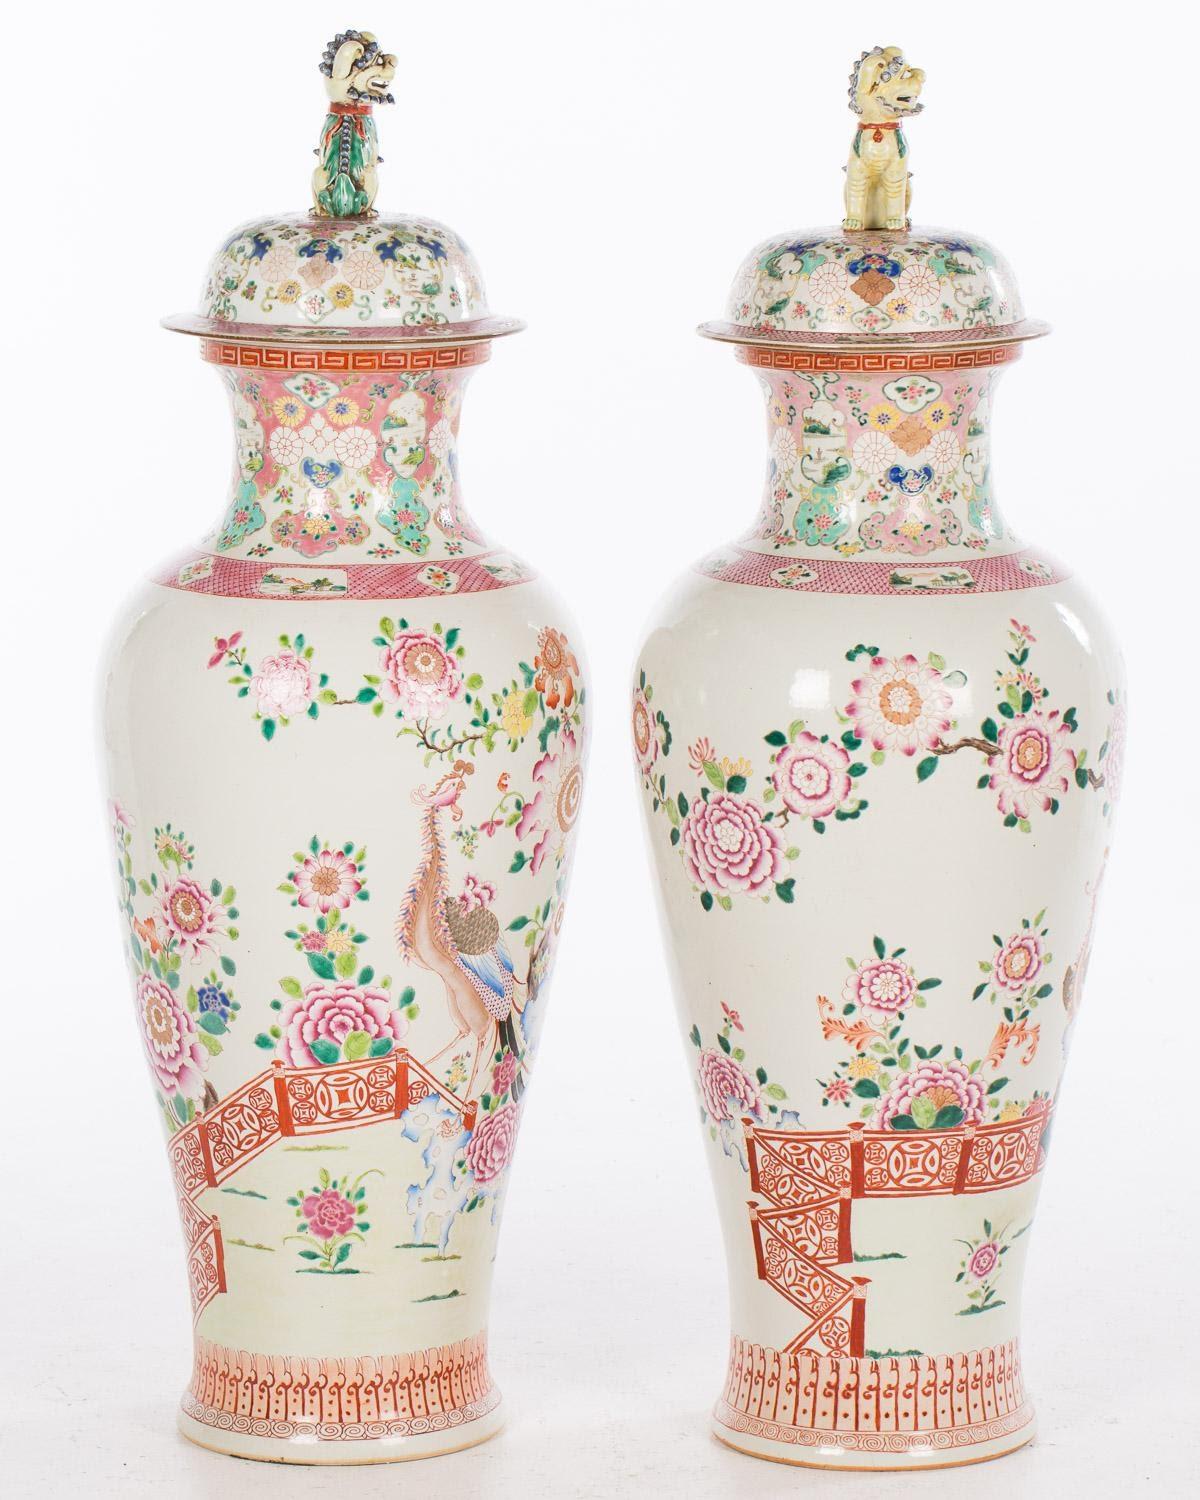 Large pair of circa 1900 Famille rose decorated porcelain covered vases, each decorated with fence, large flowering trees, landscapes within cartouches and lids with fu dog finials.